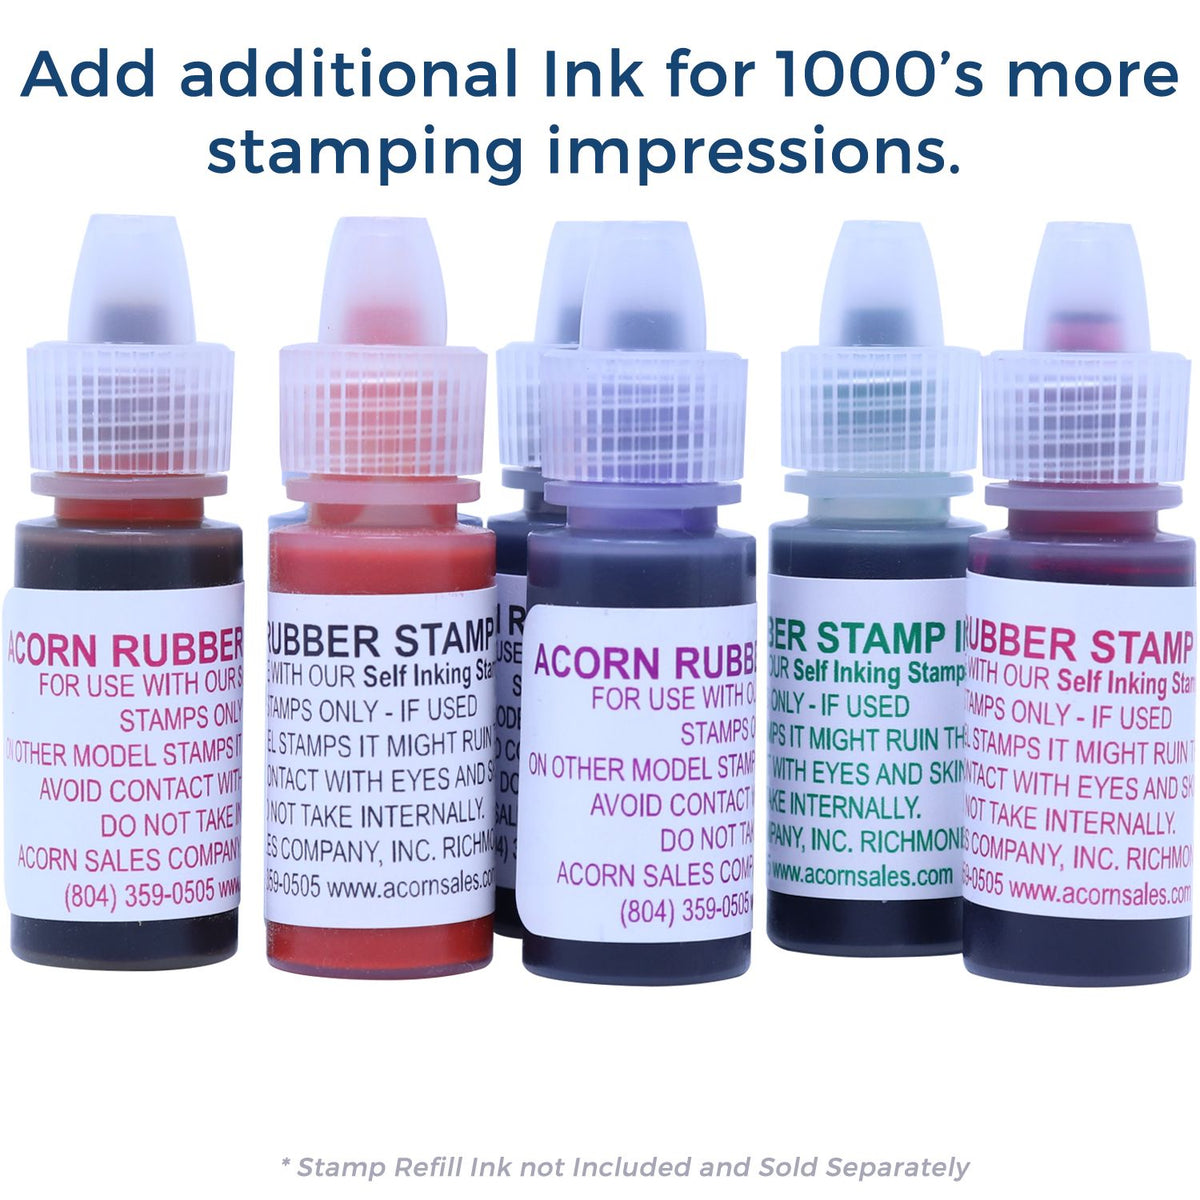 Refill Ink for Self-Inking Round Kiss Stamp Available